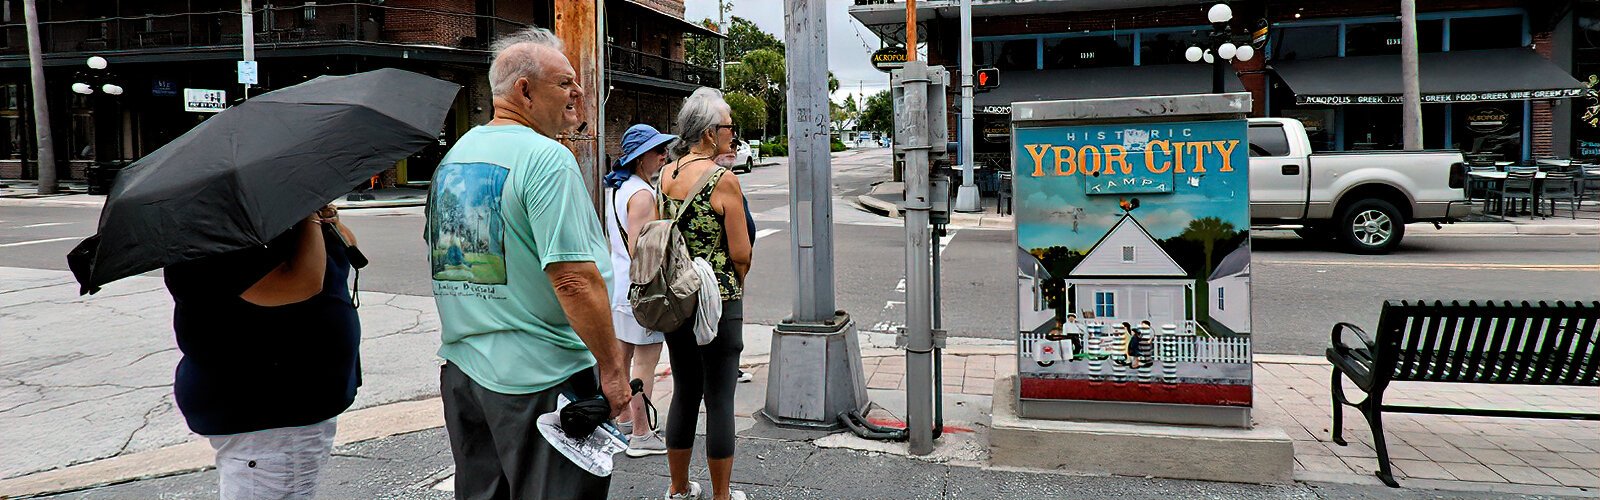 Participants walk through Ybor City, Tampa’s only National Historic Landmark District, during a walking tour organized by Tampa Bay History Center.